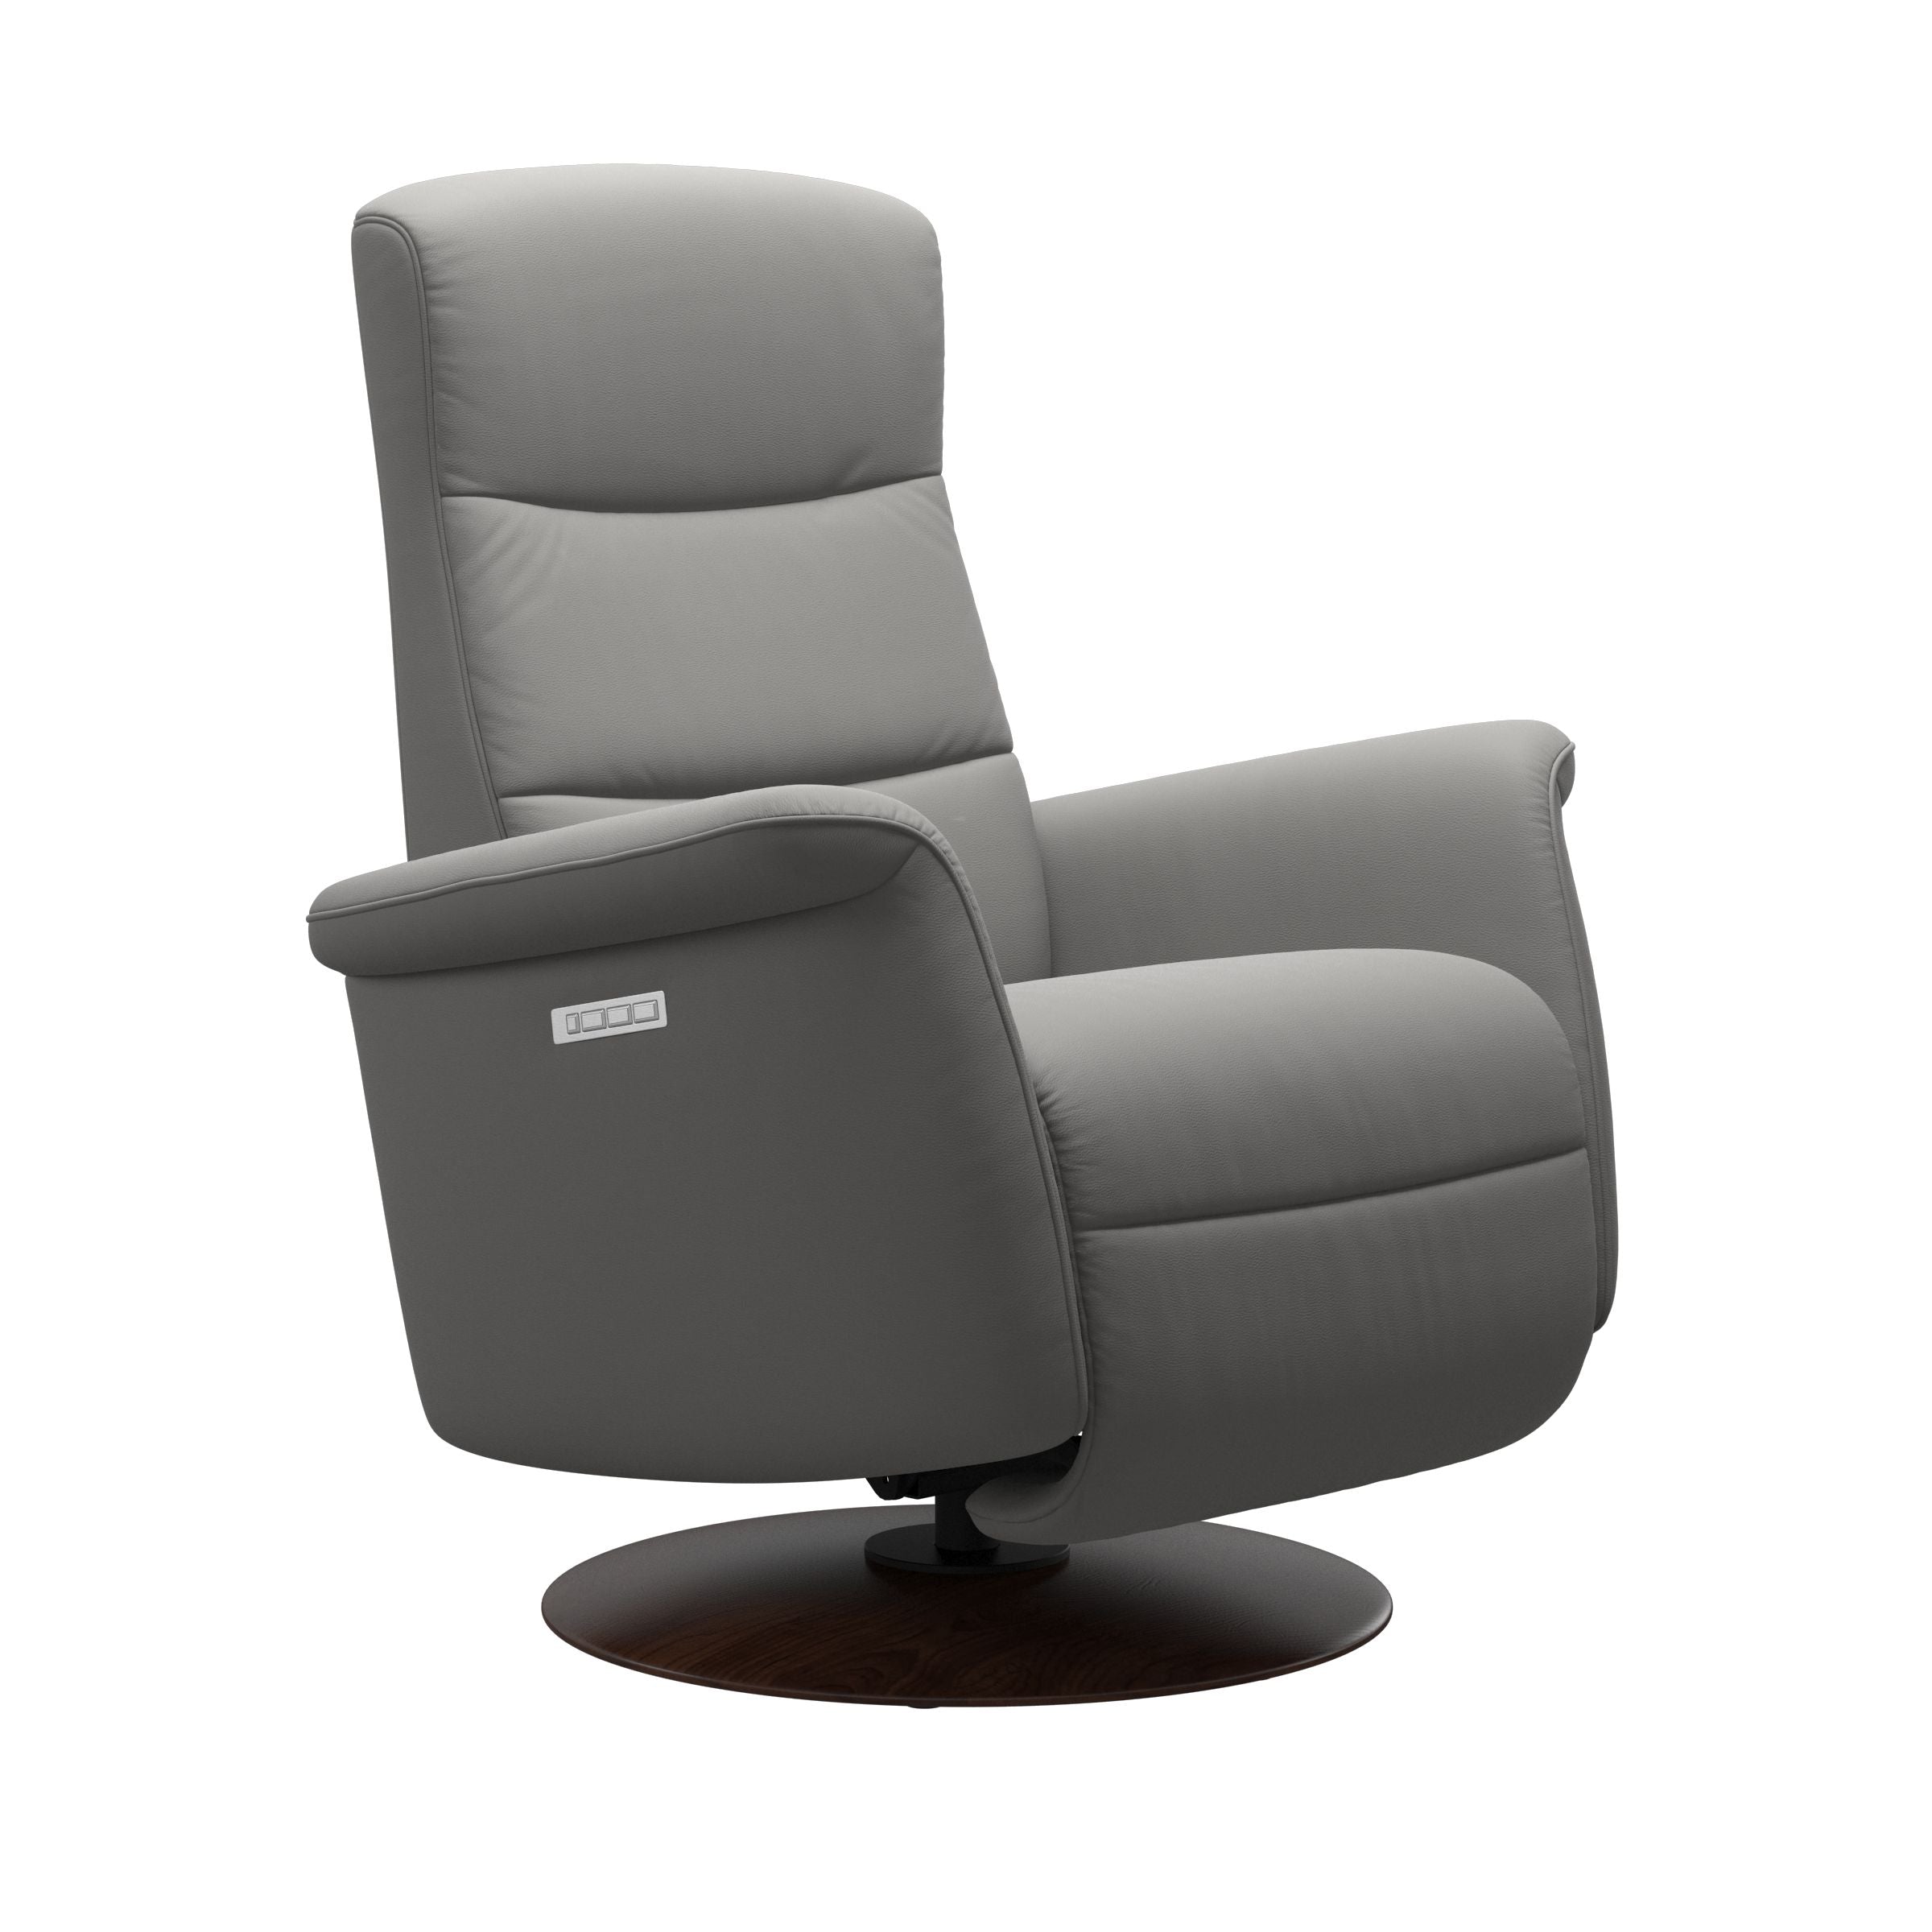 Stressless Mike Large Recliner with Wood Moon Base